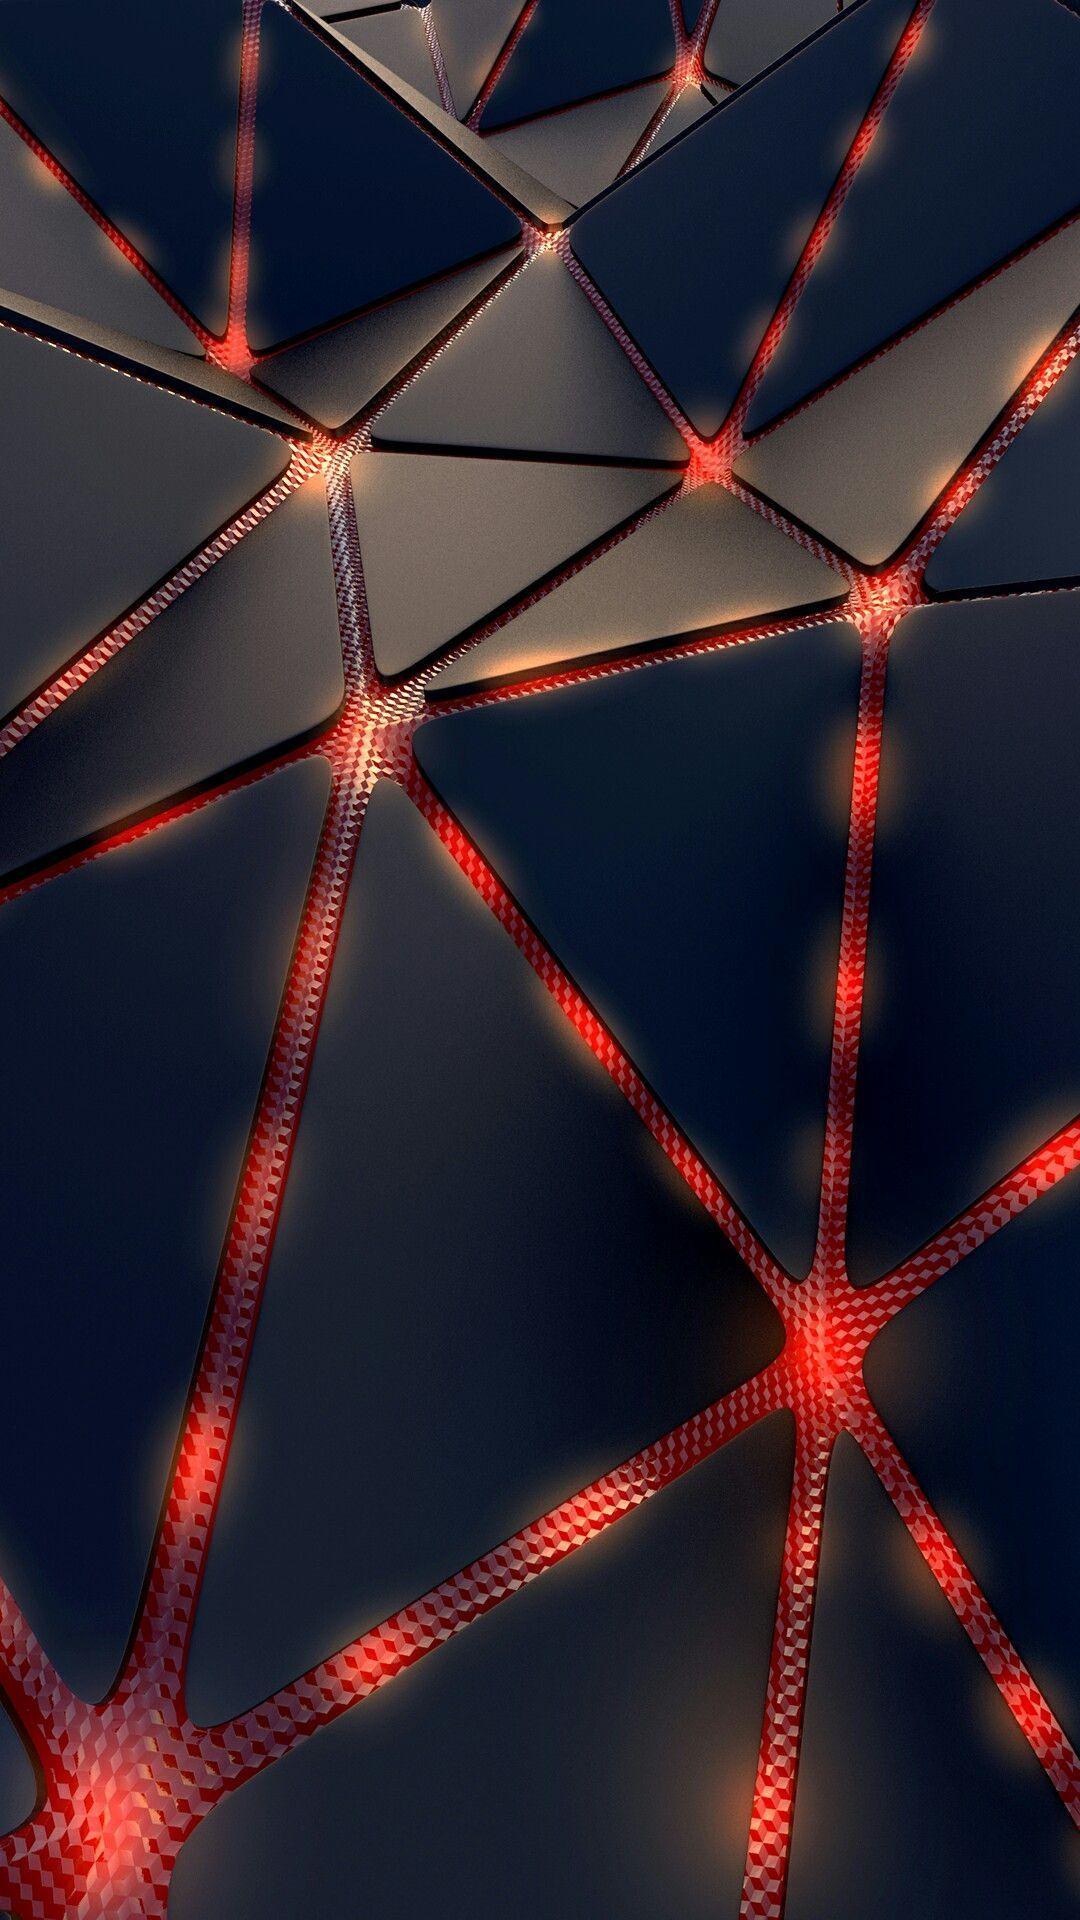 Black and Red Wallpaper. *Abstract and Geometric Wallpaper